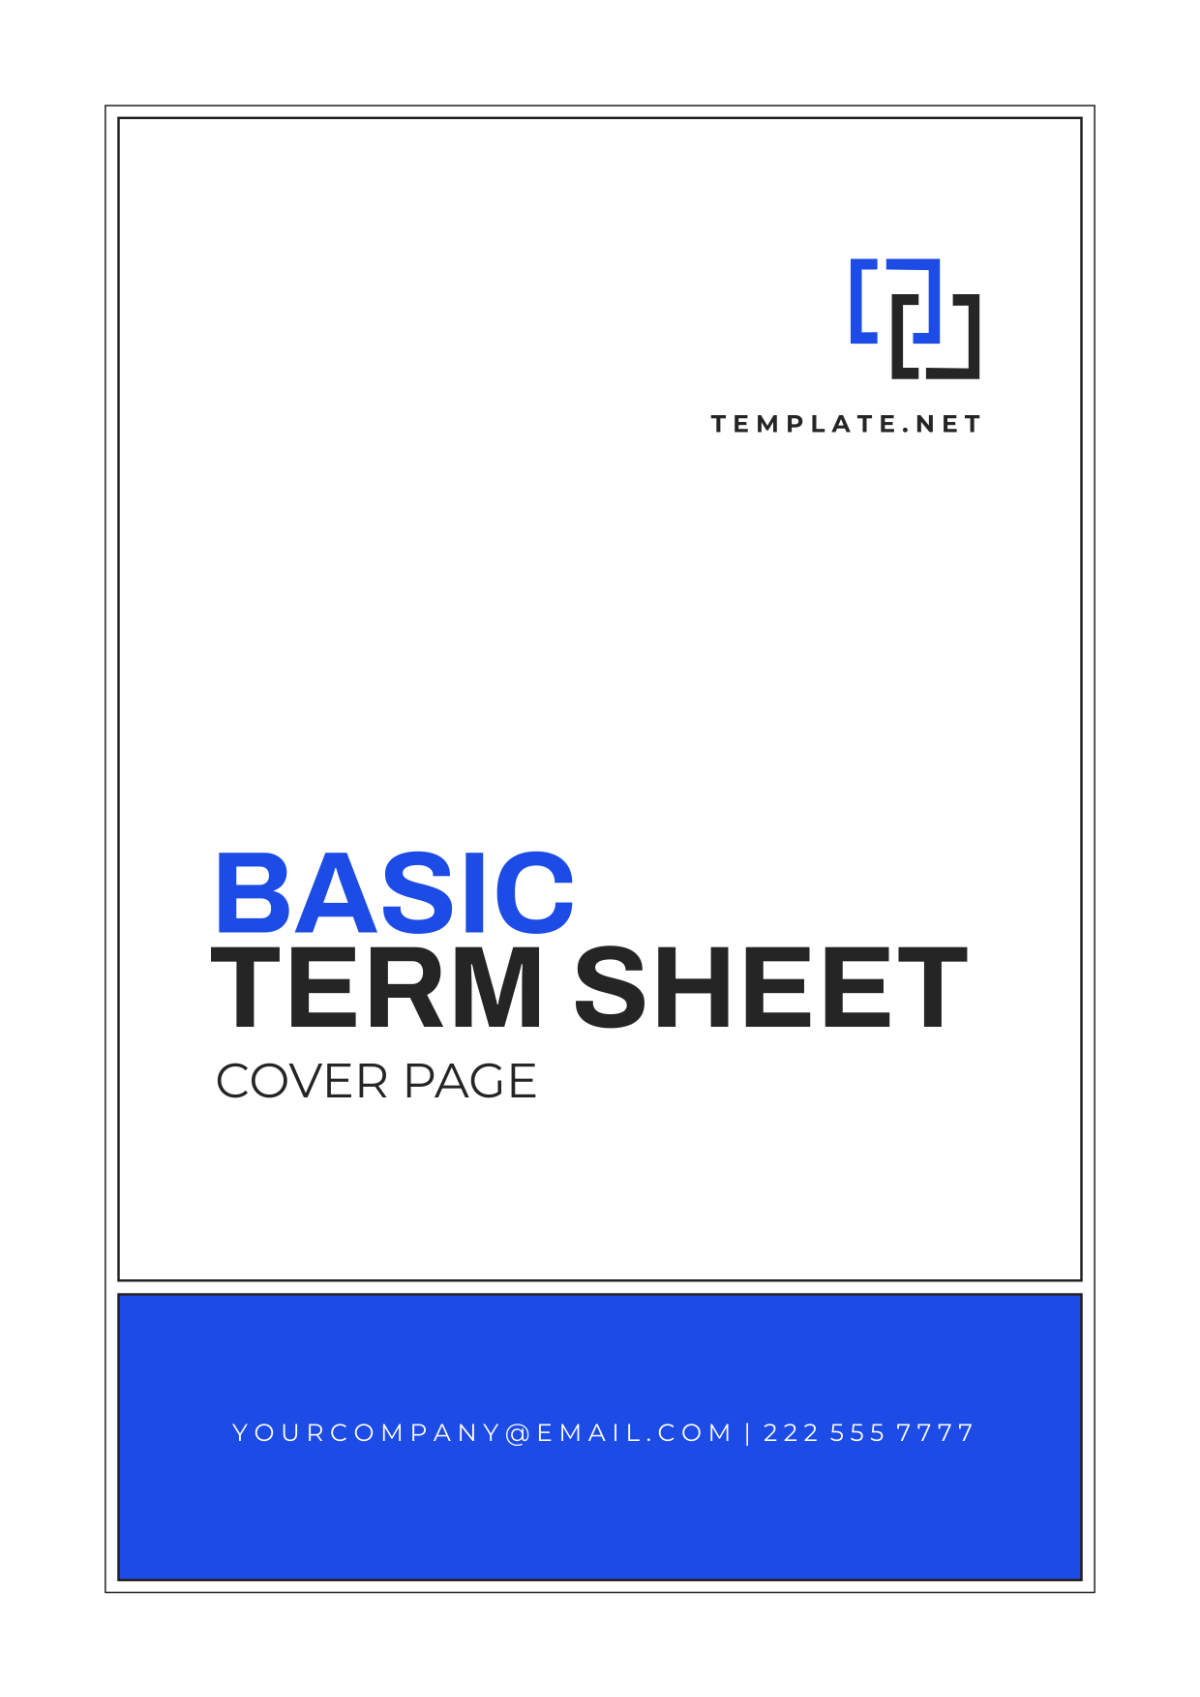 Basic Term Sheet Cover Page